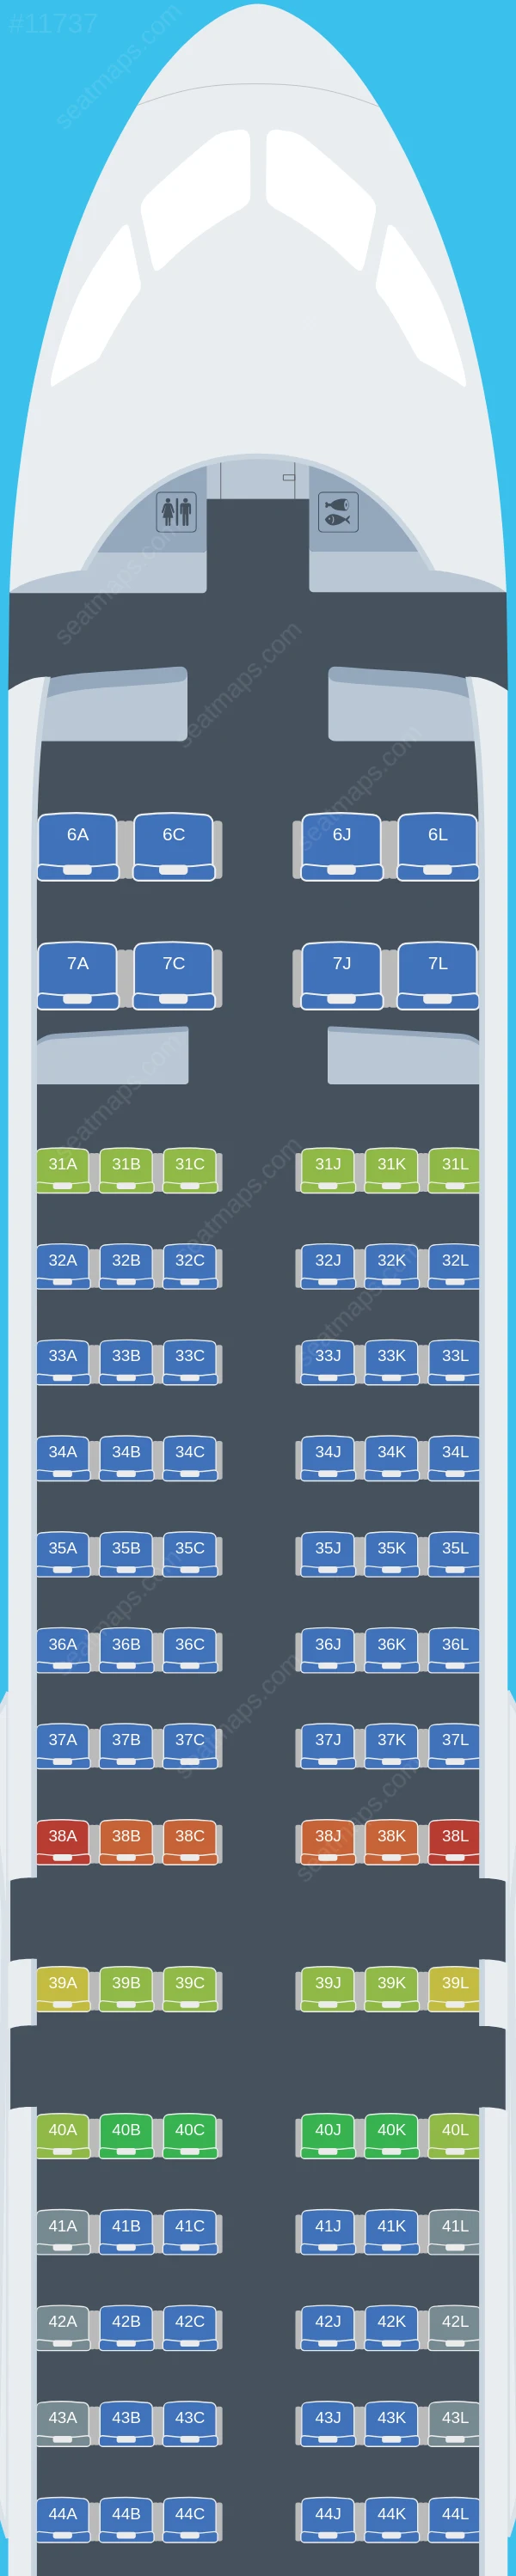 China Eastern COMAC С919 seatmap preview